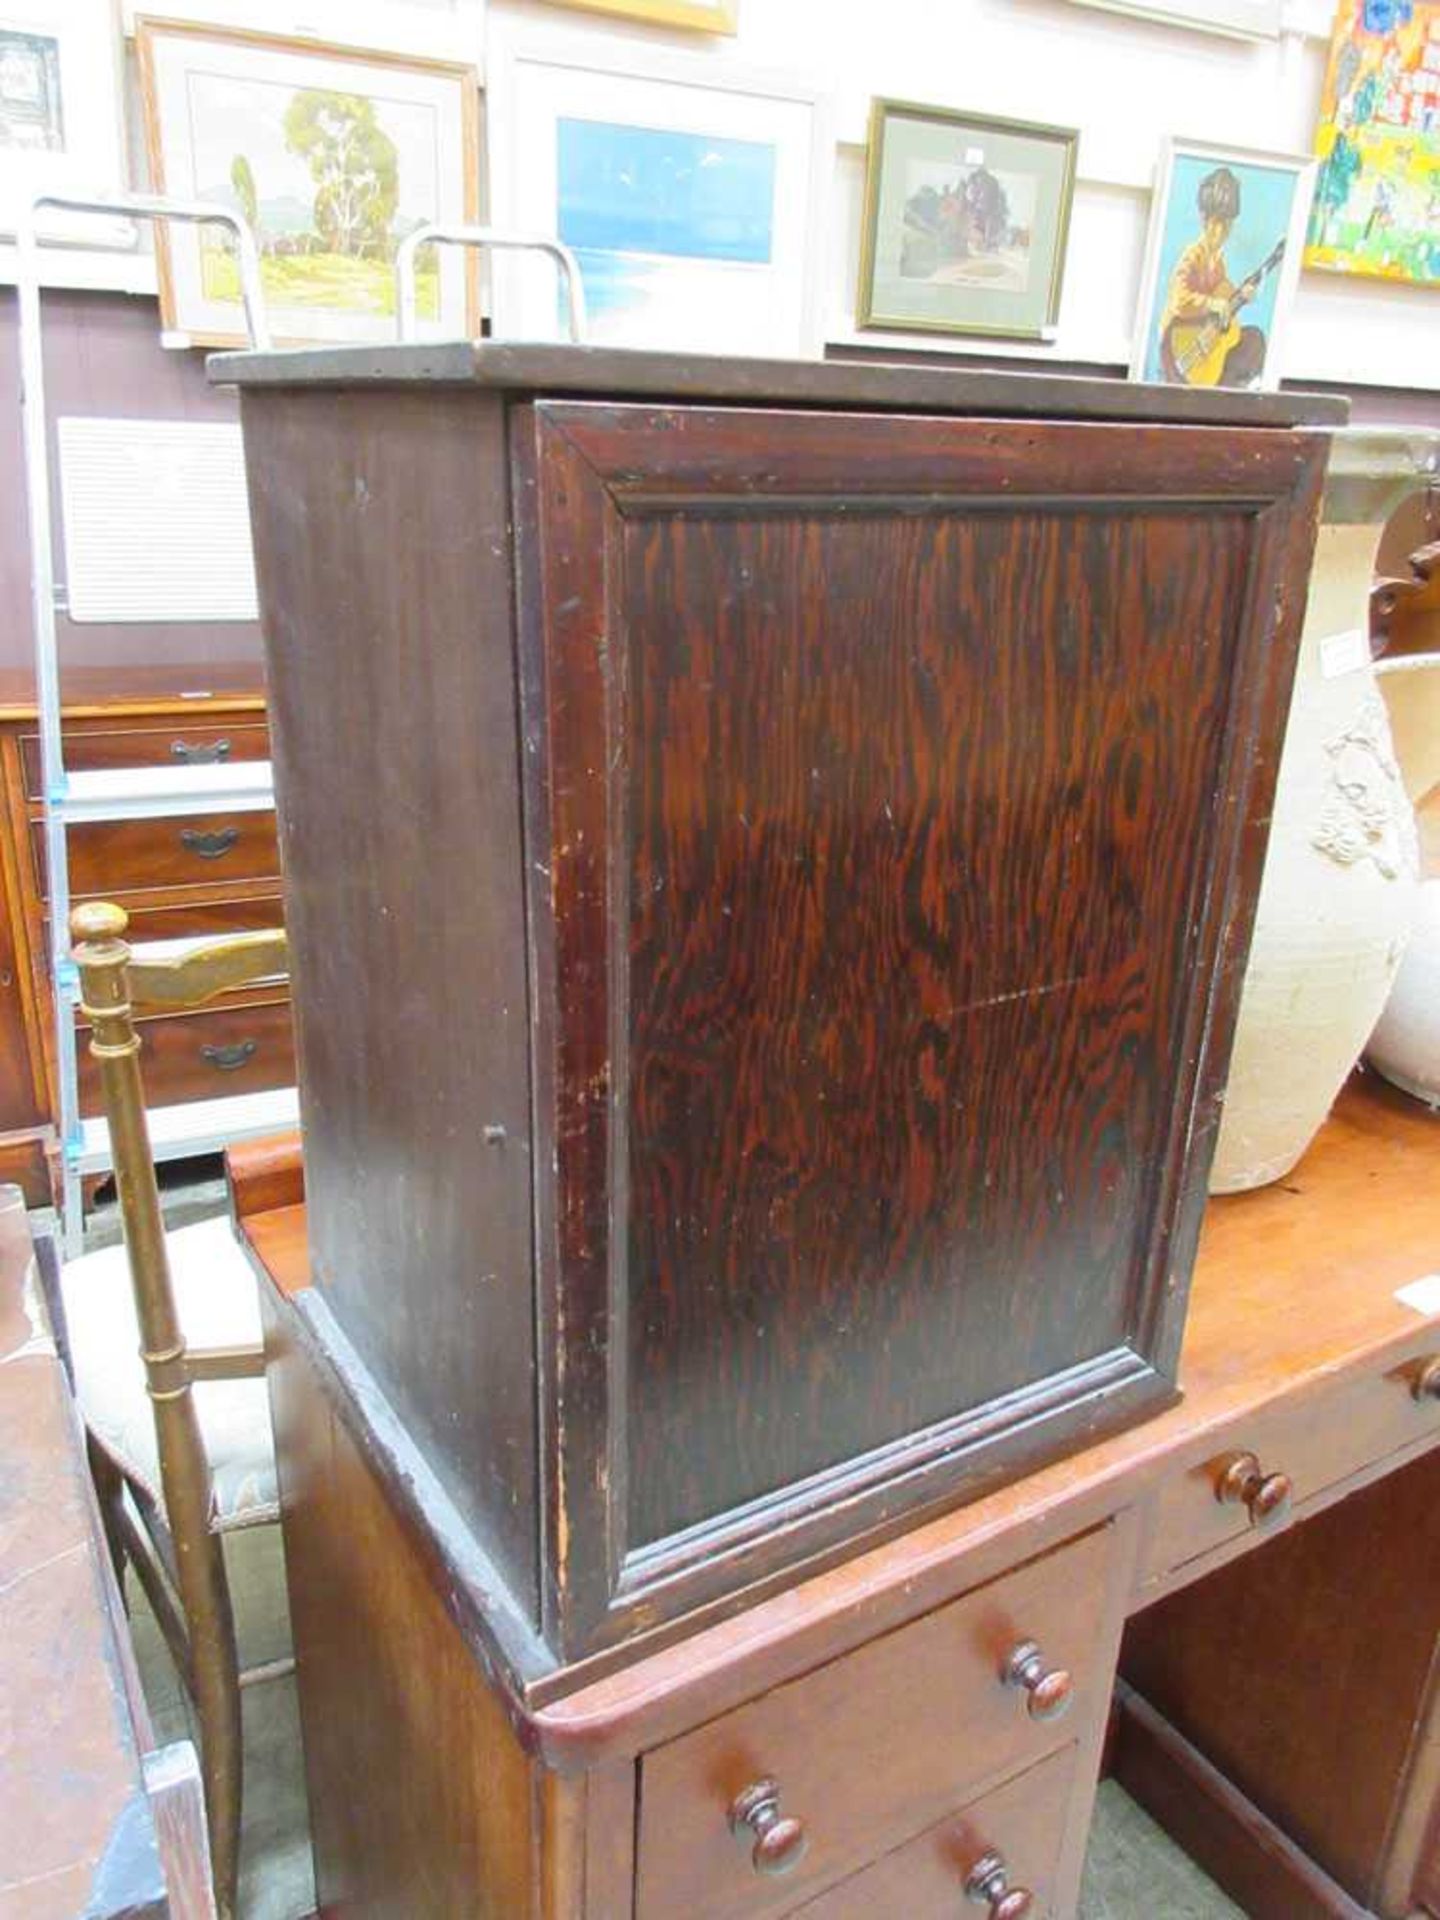 An early 20th century plywood table cabinet